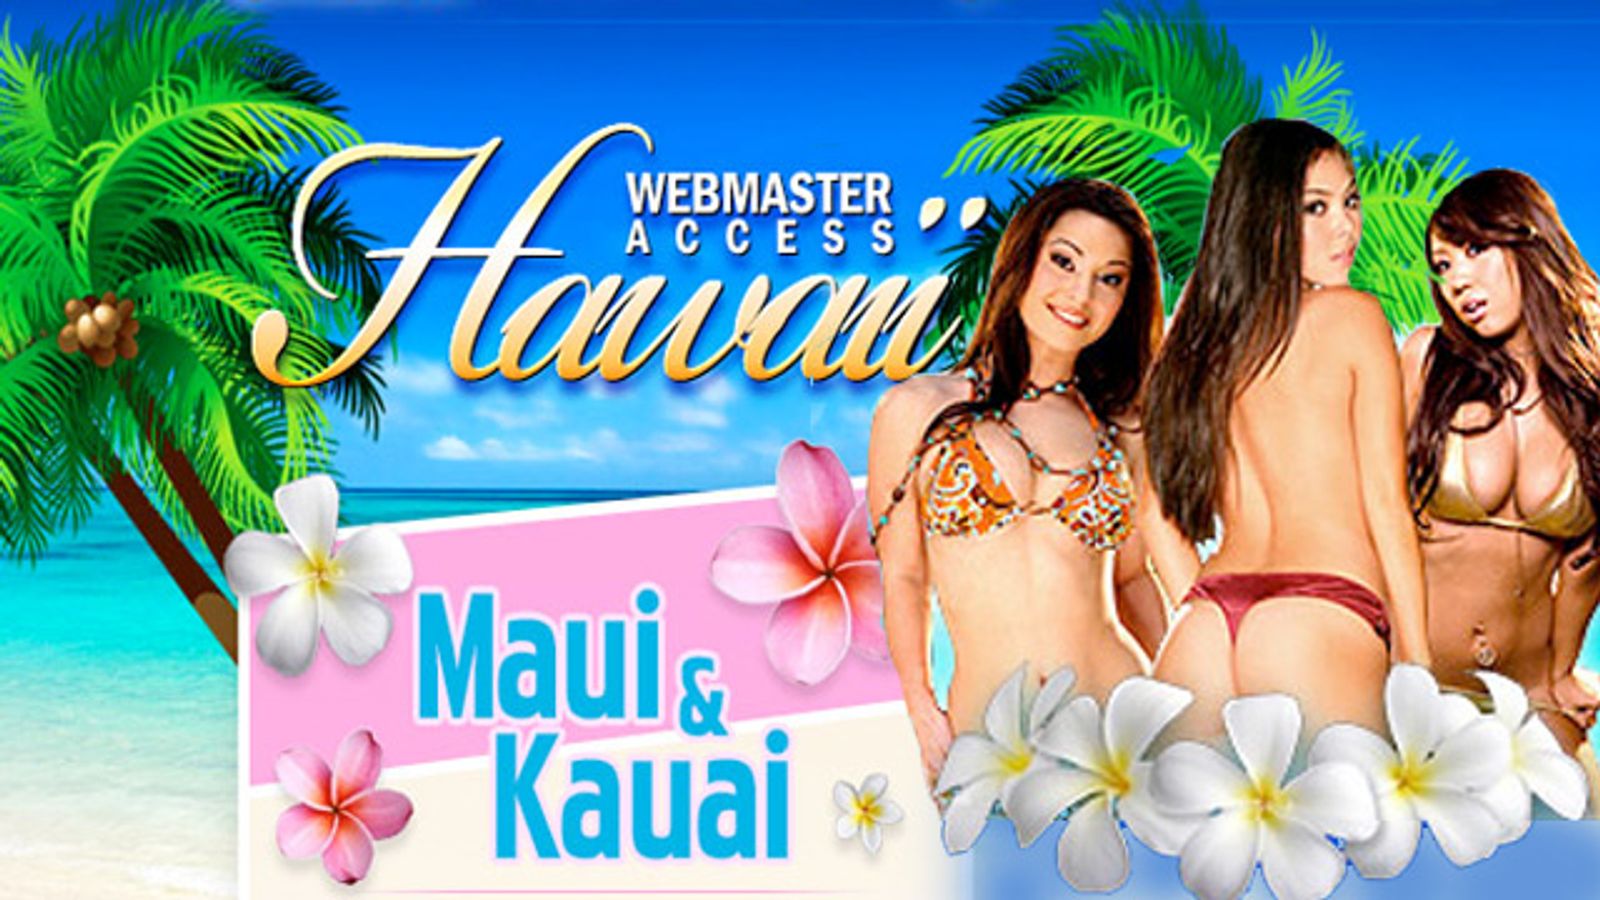 Webmaster Access Hawaii Set for Feb. 25-March 1